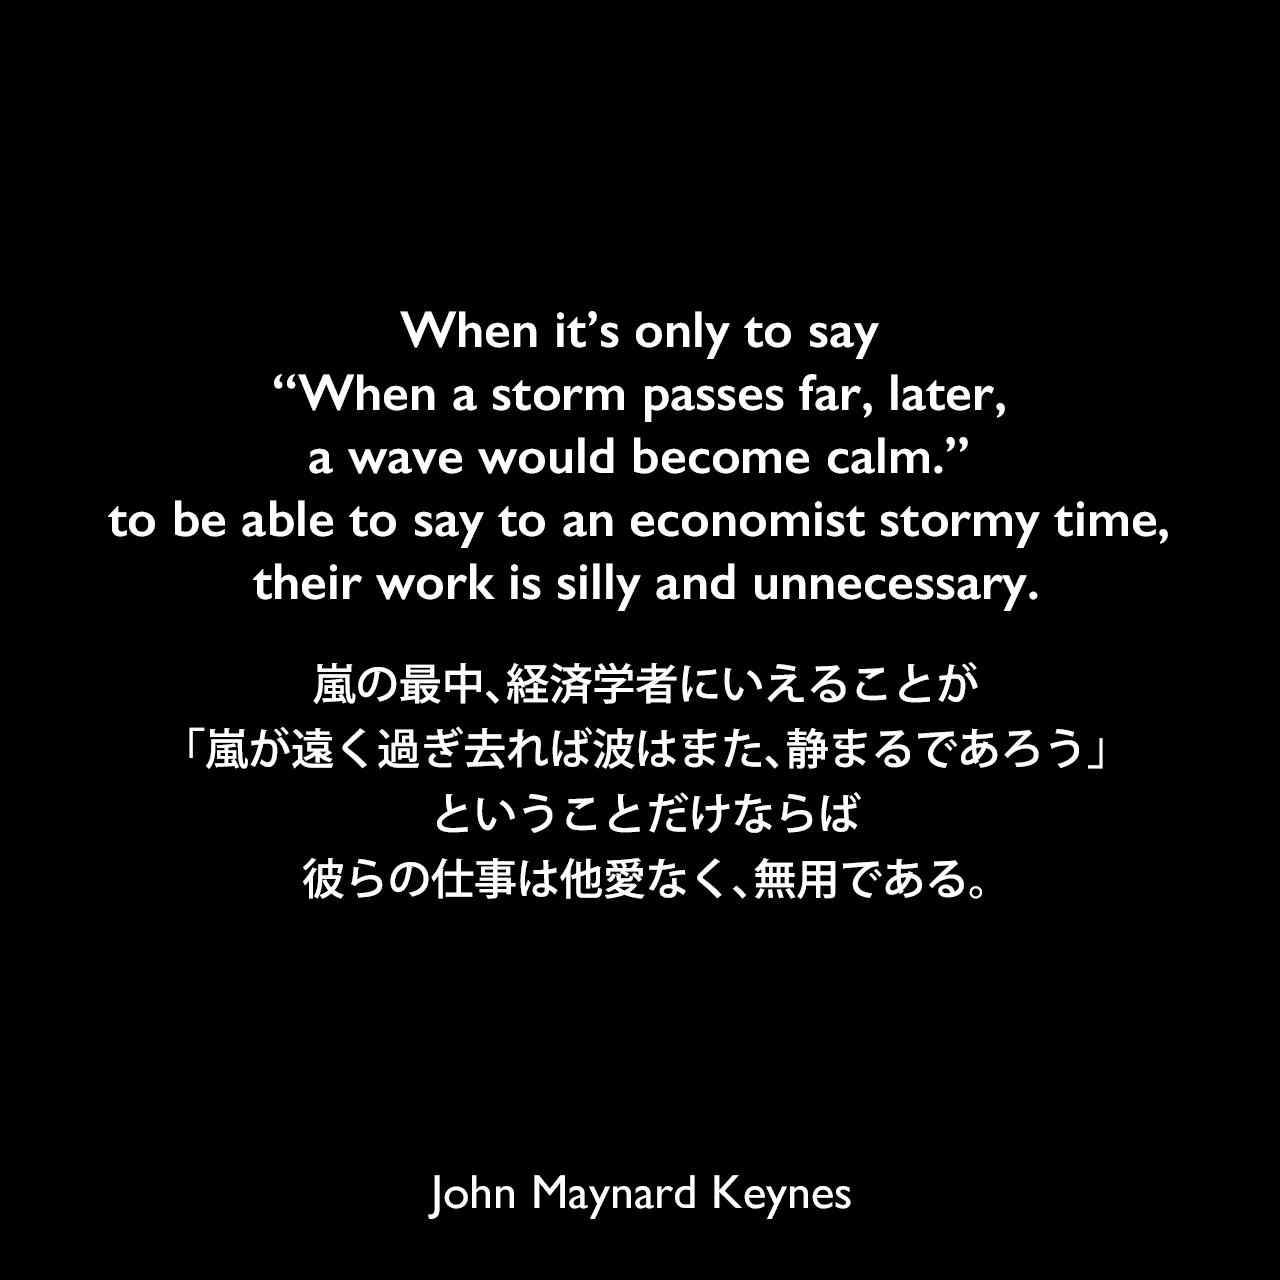 When it’s only to say “When a storm passes far, later, a wave would become calm.” to be able to say to an economist stormy time, their work is silly and unnecessary.嵐の最中、経済学者にいえることが、「嵐が遠く過ぎ去れば波はまた、静まるであろう」ということだけならば、彼らの仕事は他愛なく、無用である。John Maynard Keynes